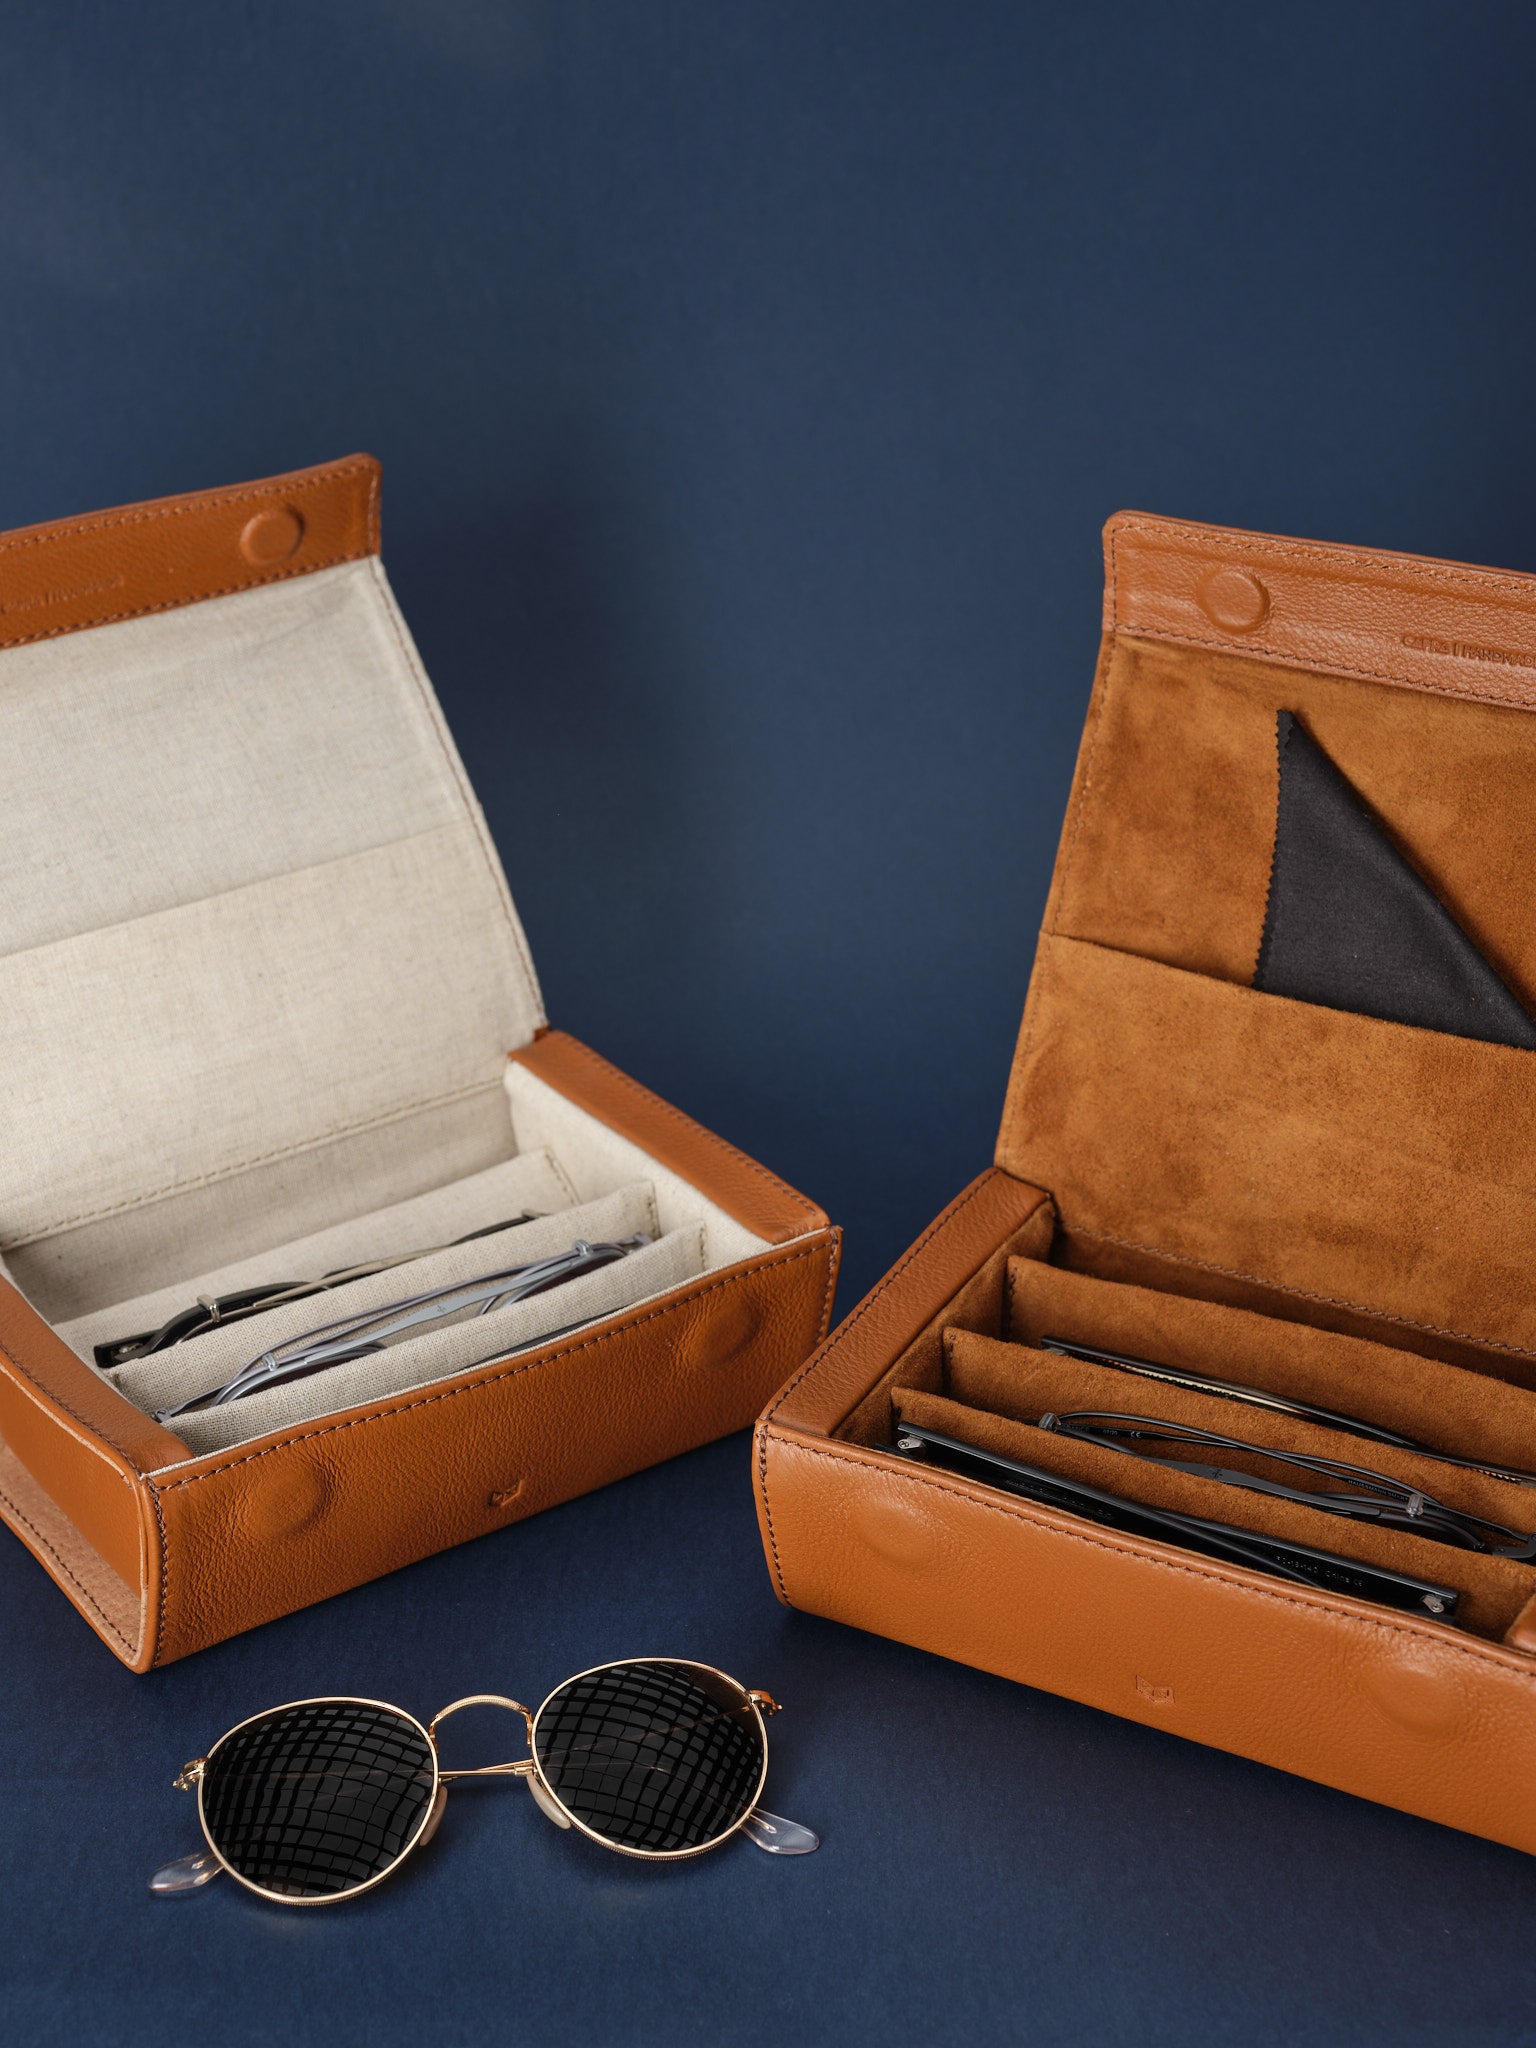 Natural Leather Sunglasses Case: Extraordinary Quality & Design